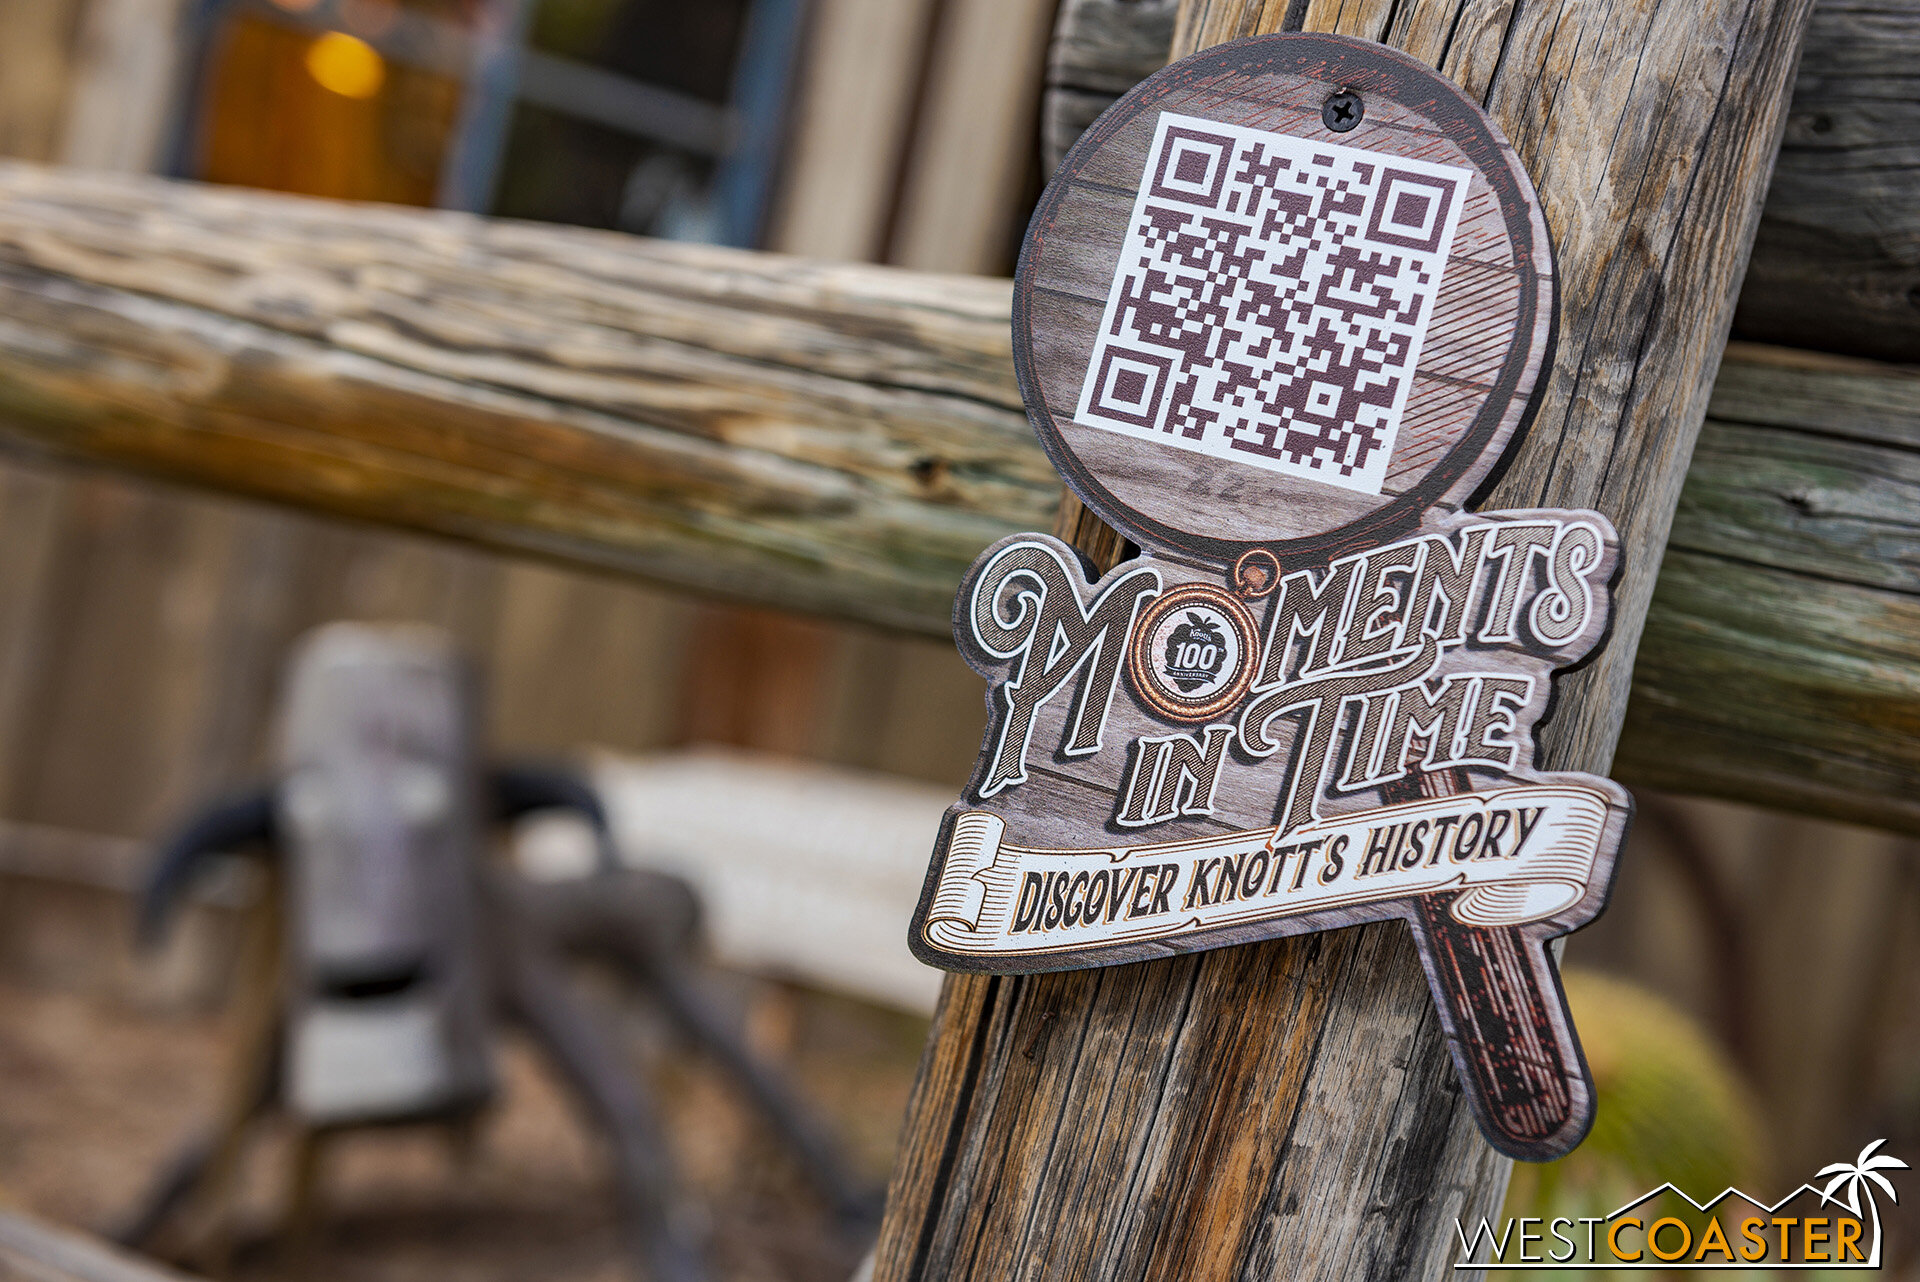  Scan a QR code learn something from Knott’s past! 